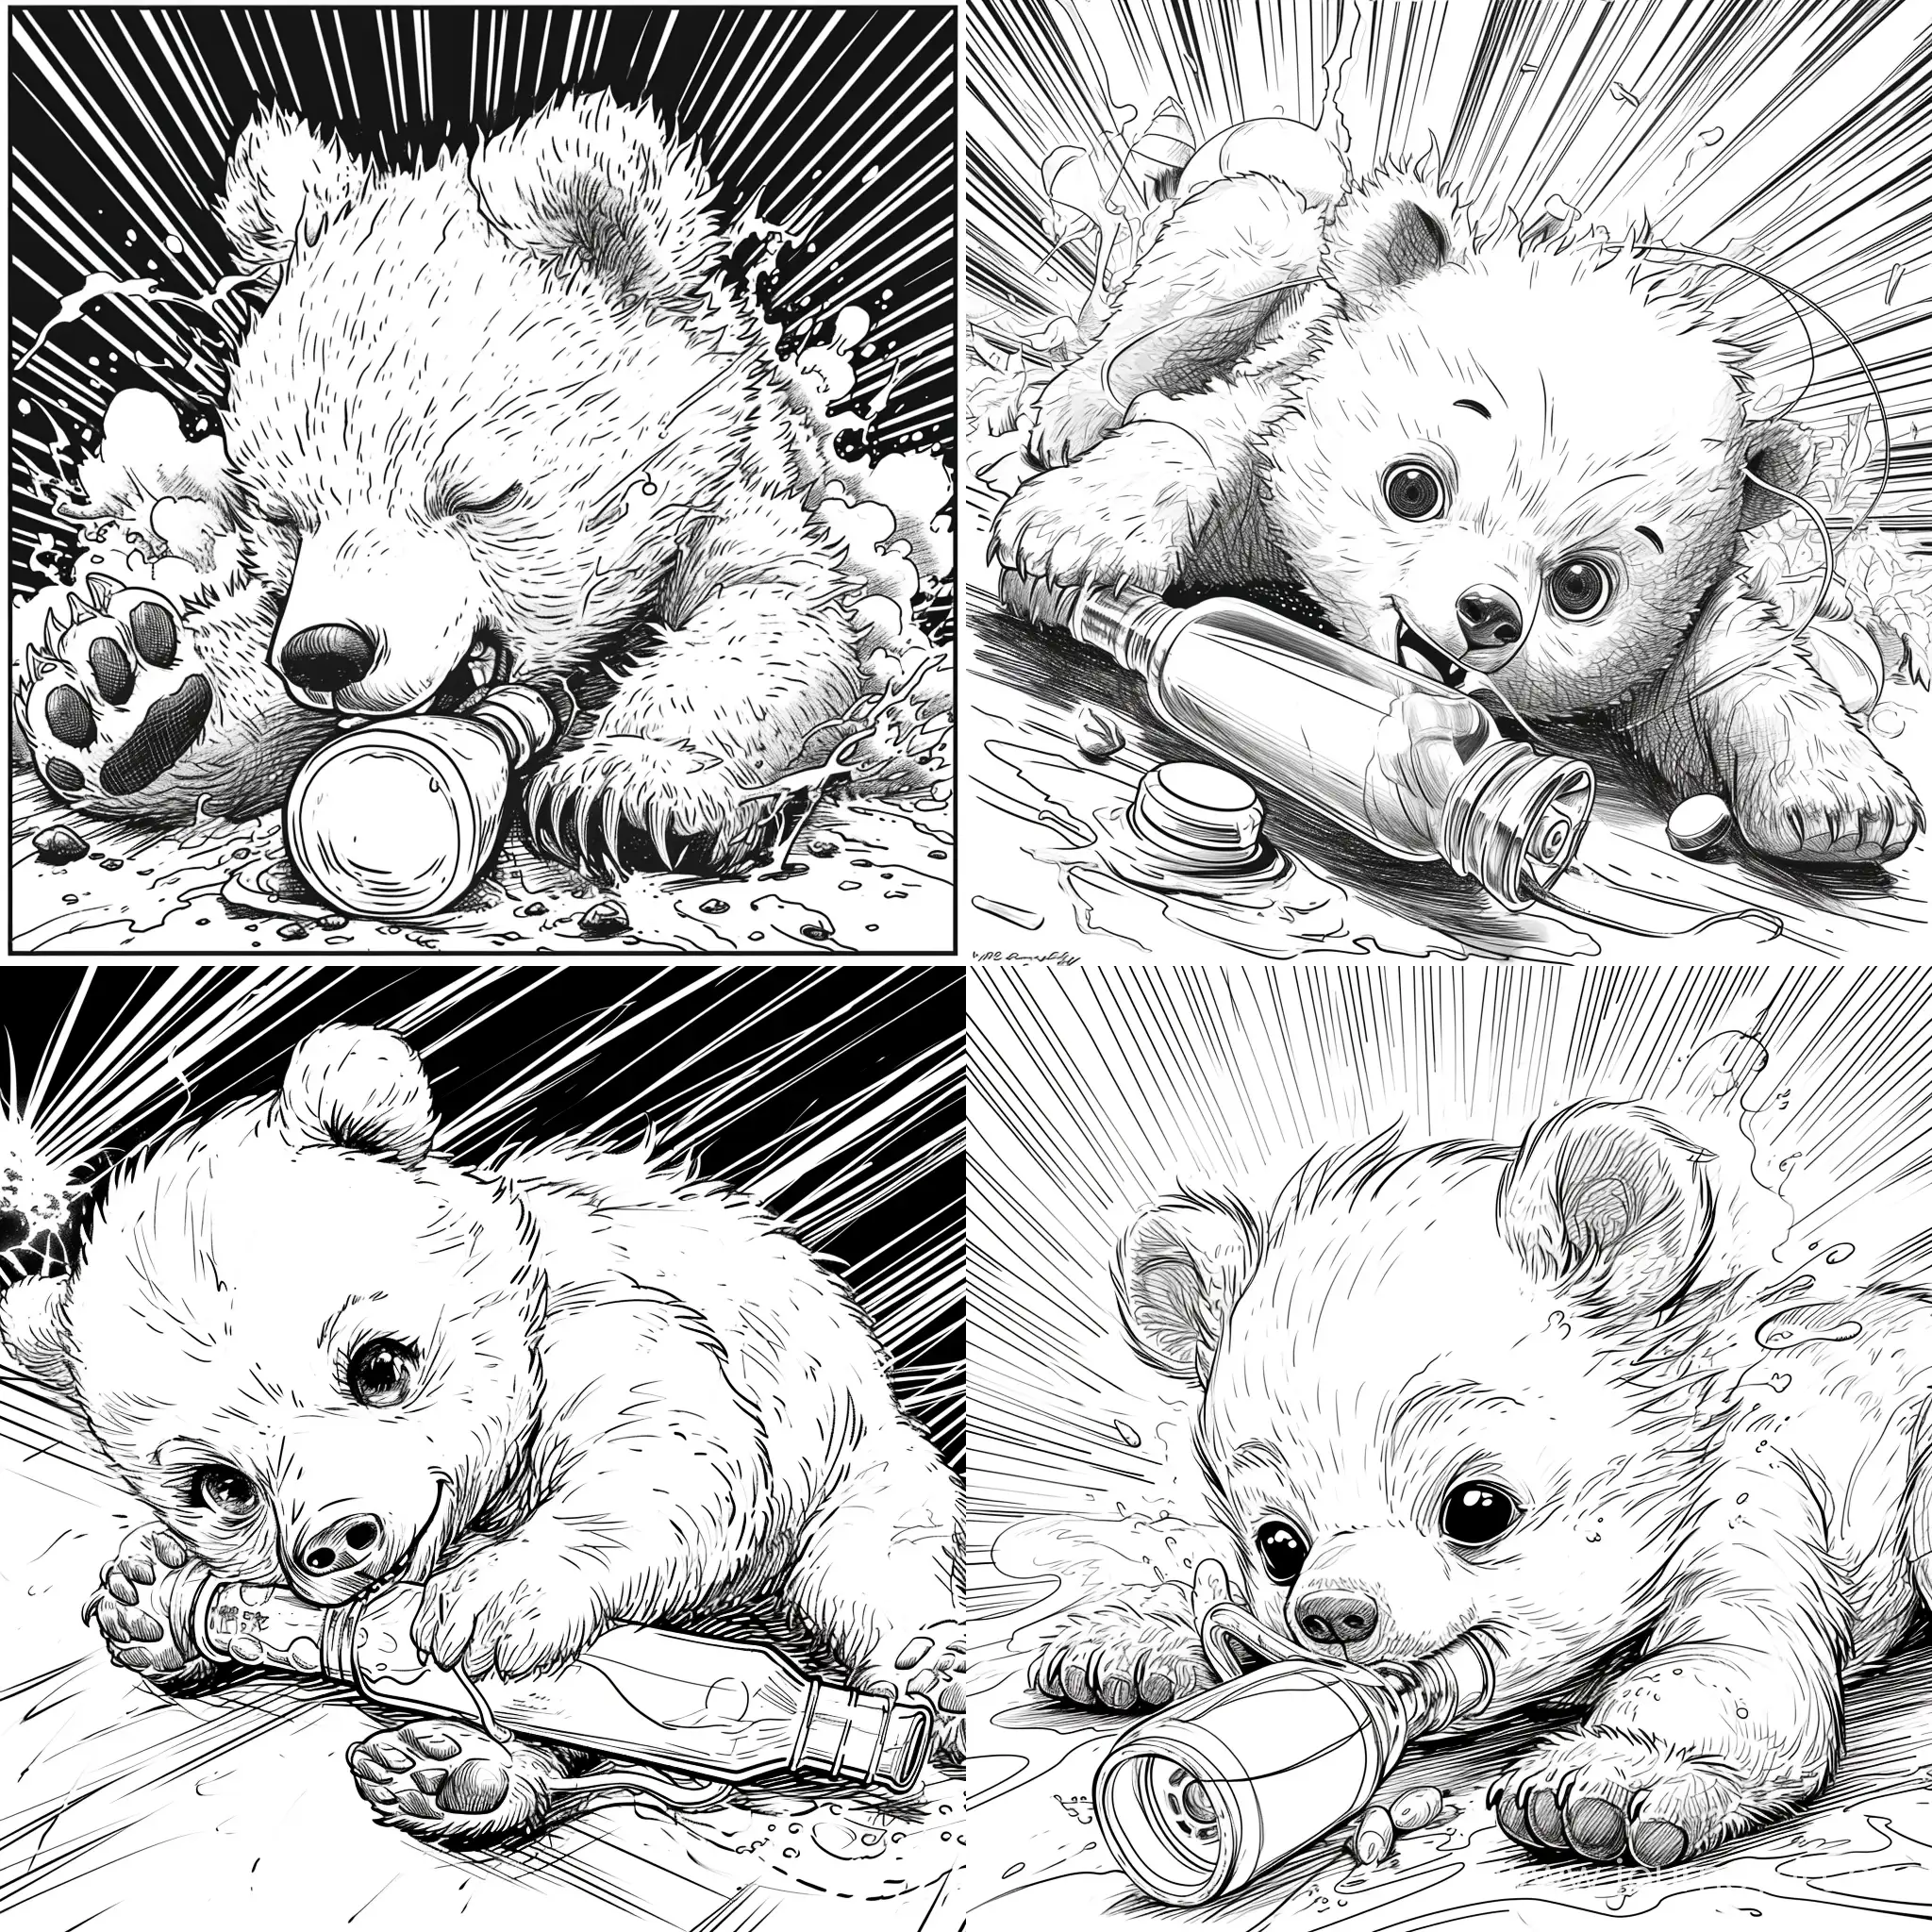 Create an image in the style of a 90s Japanese manga, depicting a baby bear cub lying down and using a bong as if it were a milk bottle. The cub should retain some youthful features but look less exaggeratedly cute and more like a typical manga-style animal character. The background should have action lines and expressive effects to match the intensity of classic manga scenes, all rendered in black-and-white with the detailed shading and linework of the era